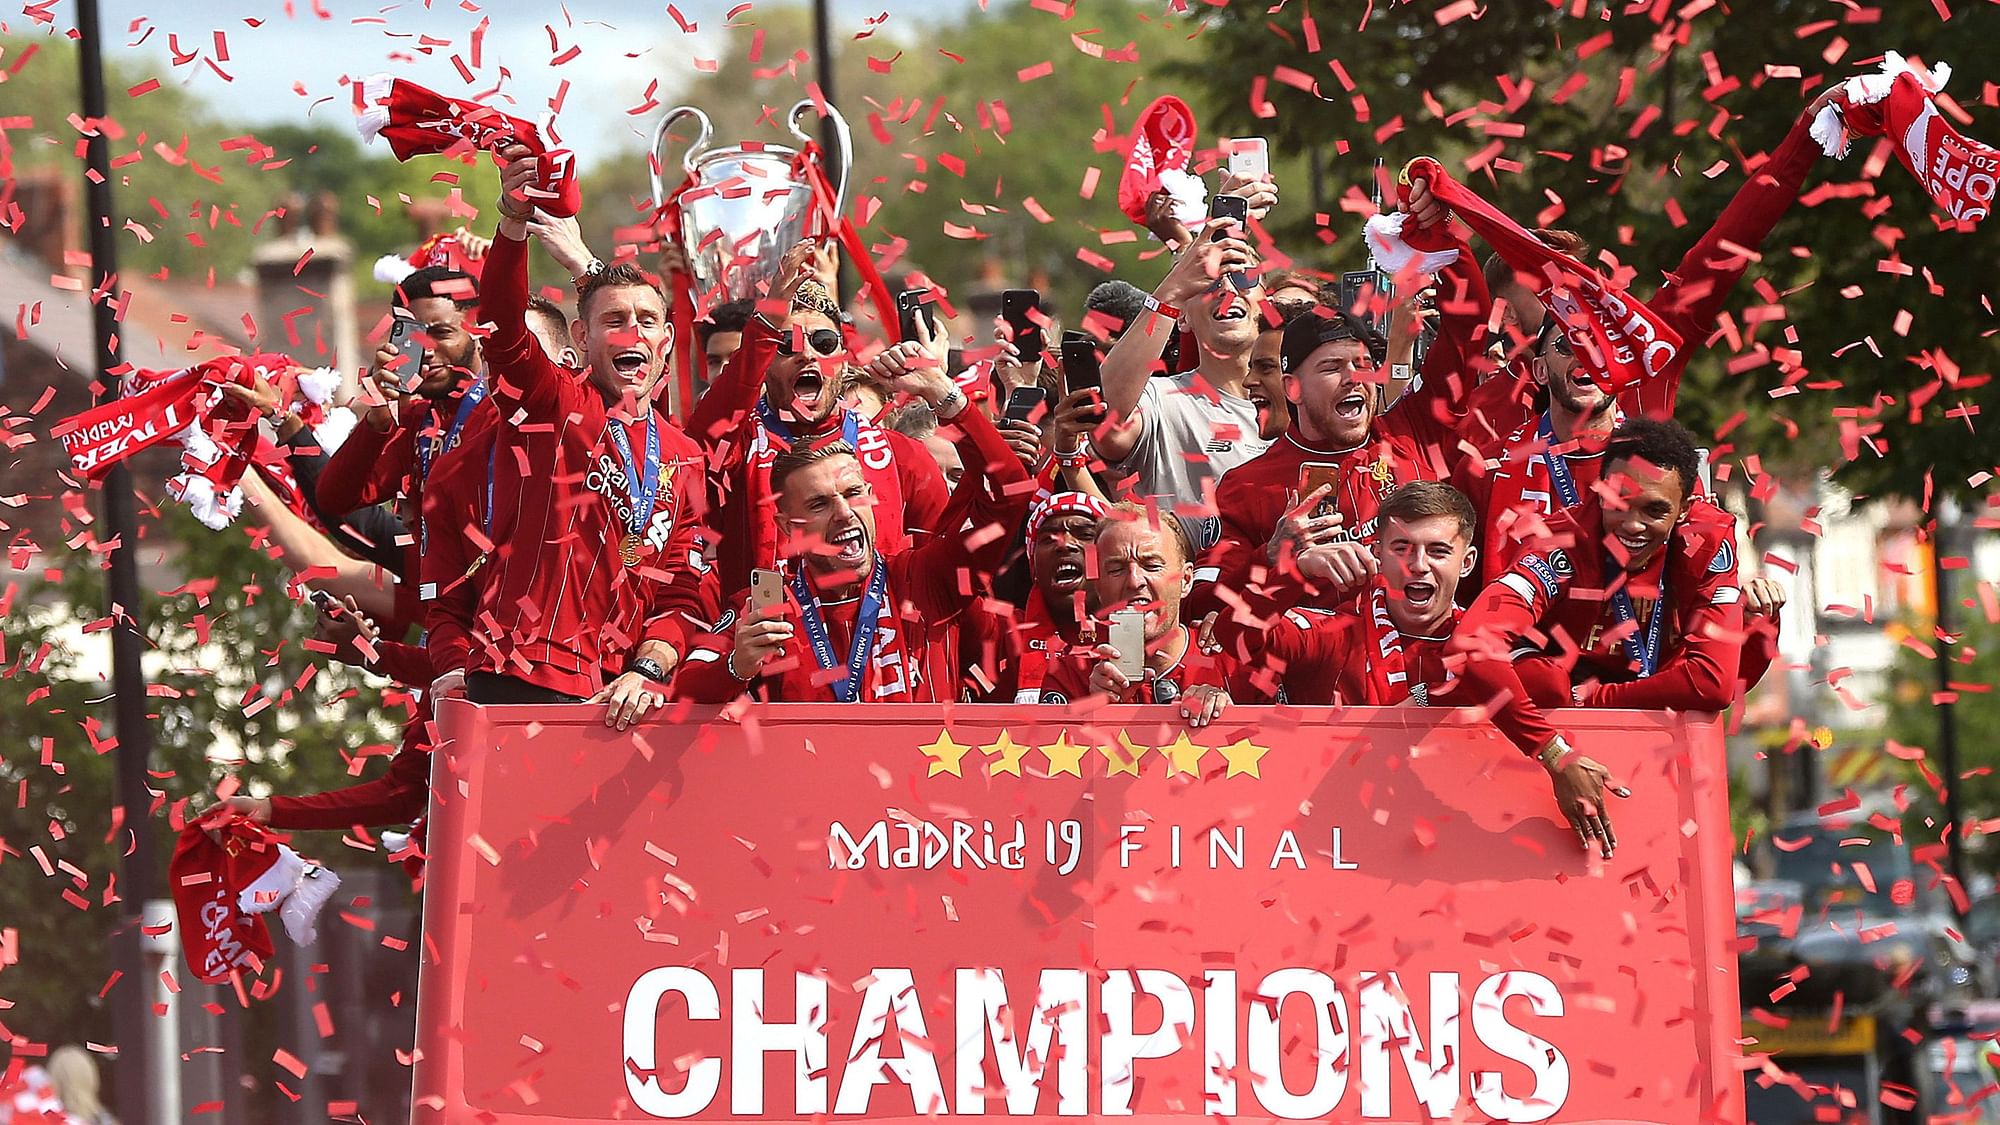 Liverpool beat Tottenham Hotspur 2-0 in the final of the UEFA Champions League 2019 to win their sixth European title.